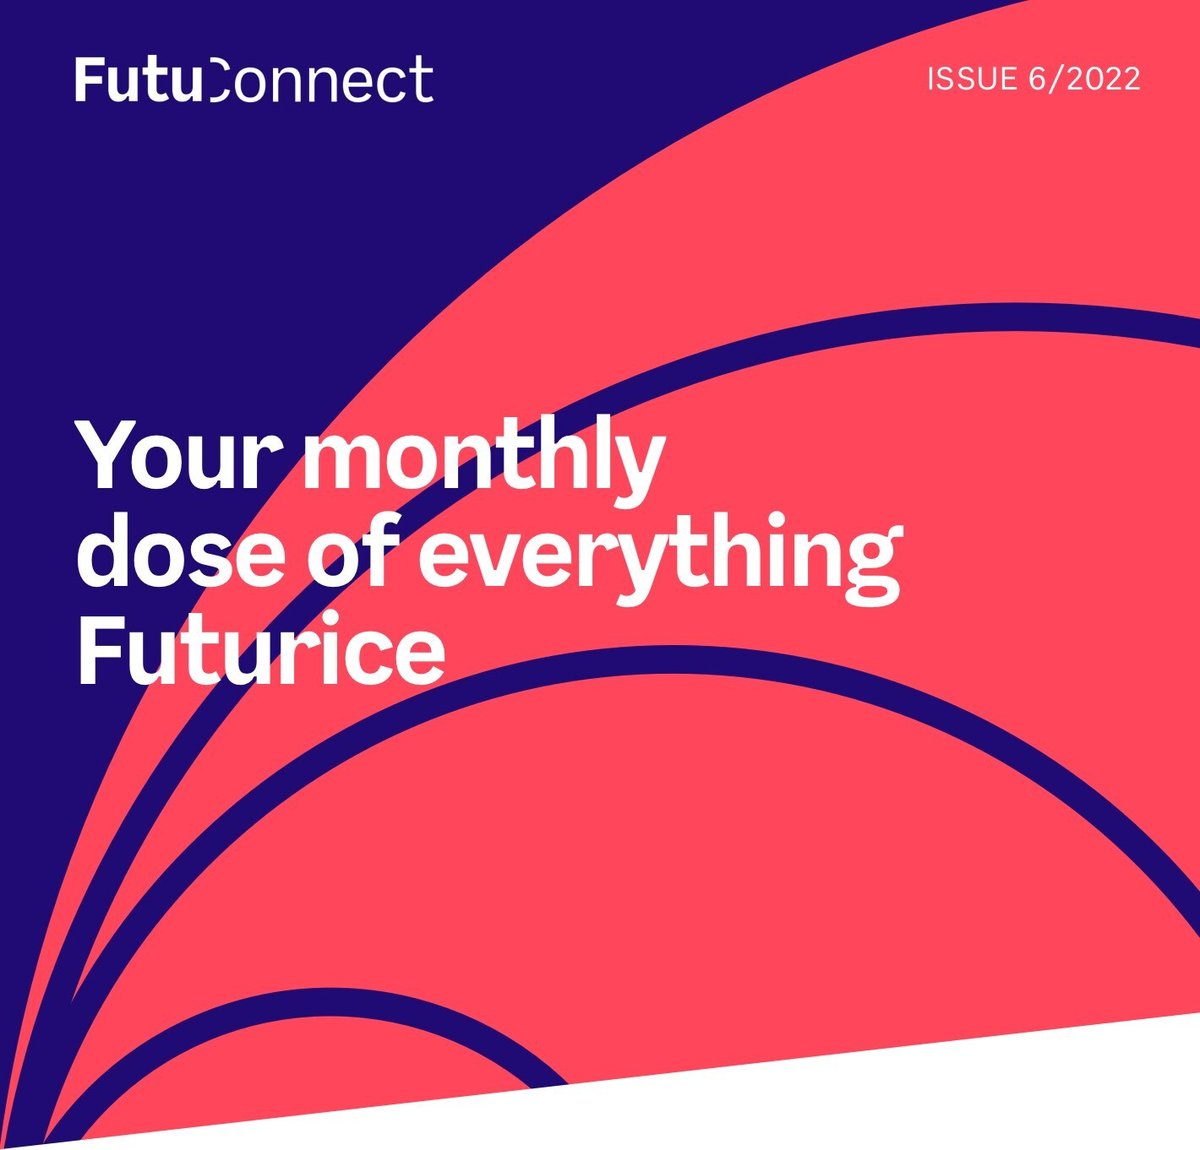 FutuConnect newsletter issue 6